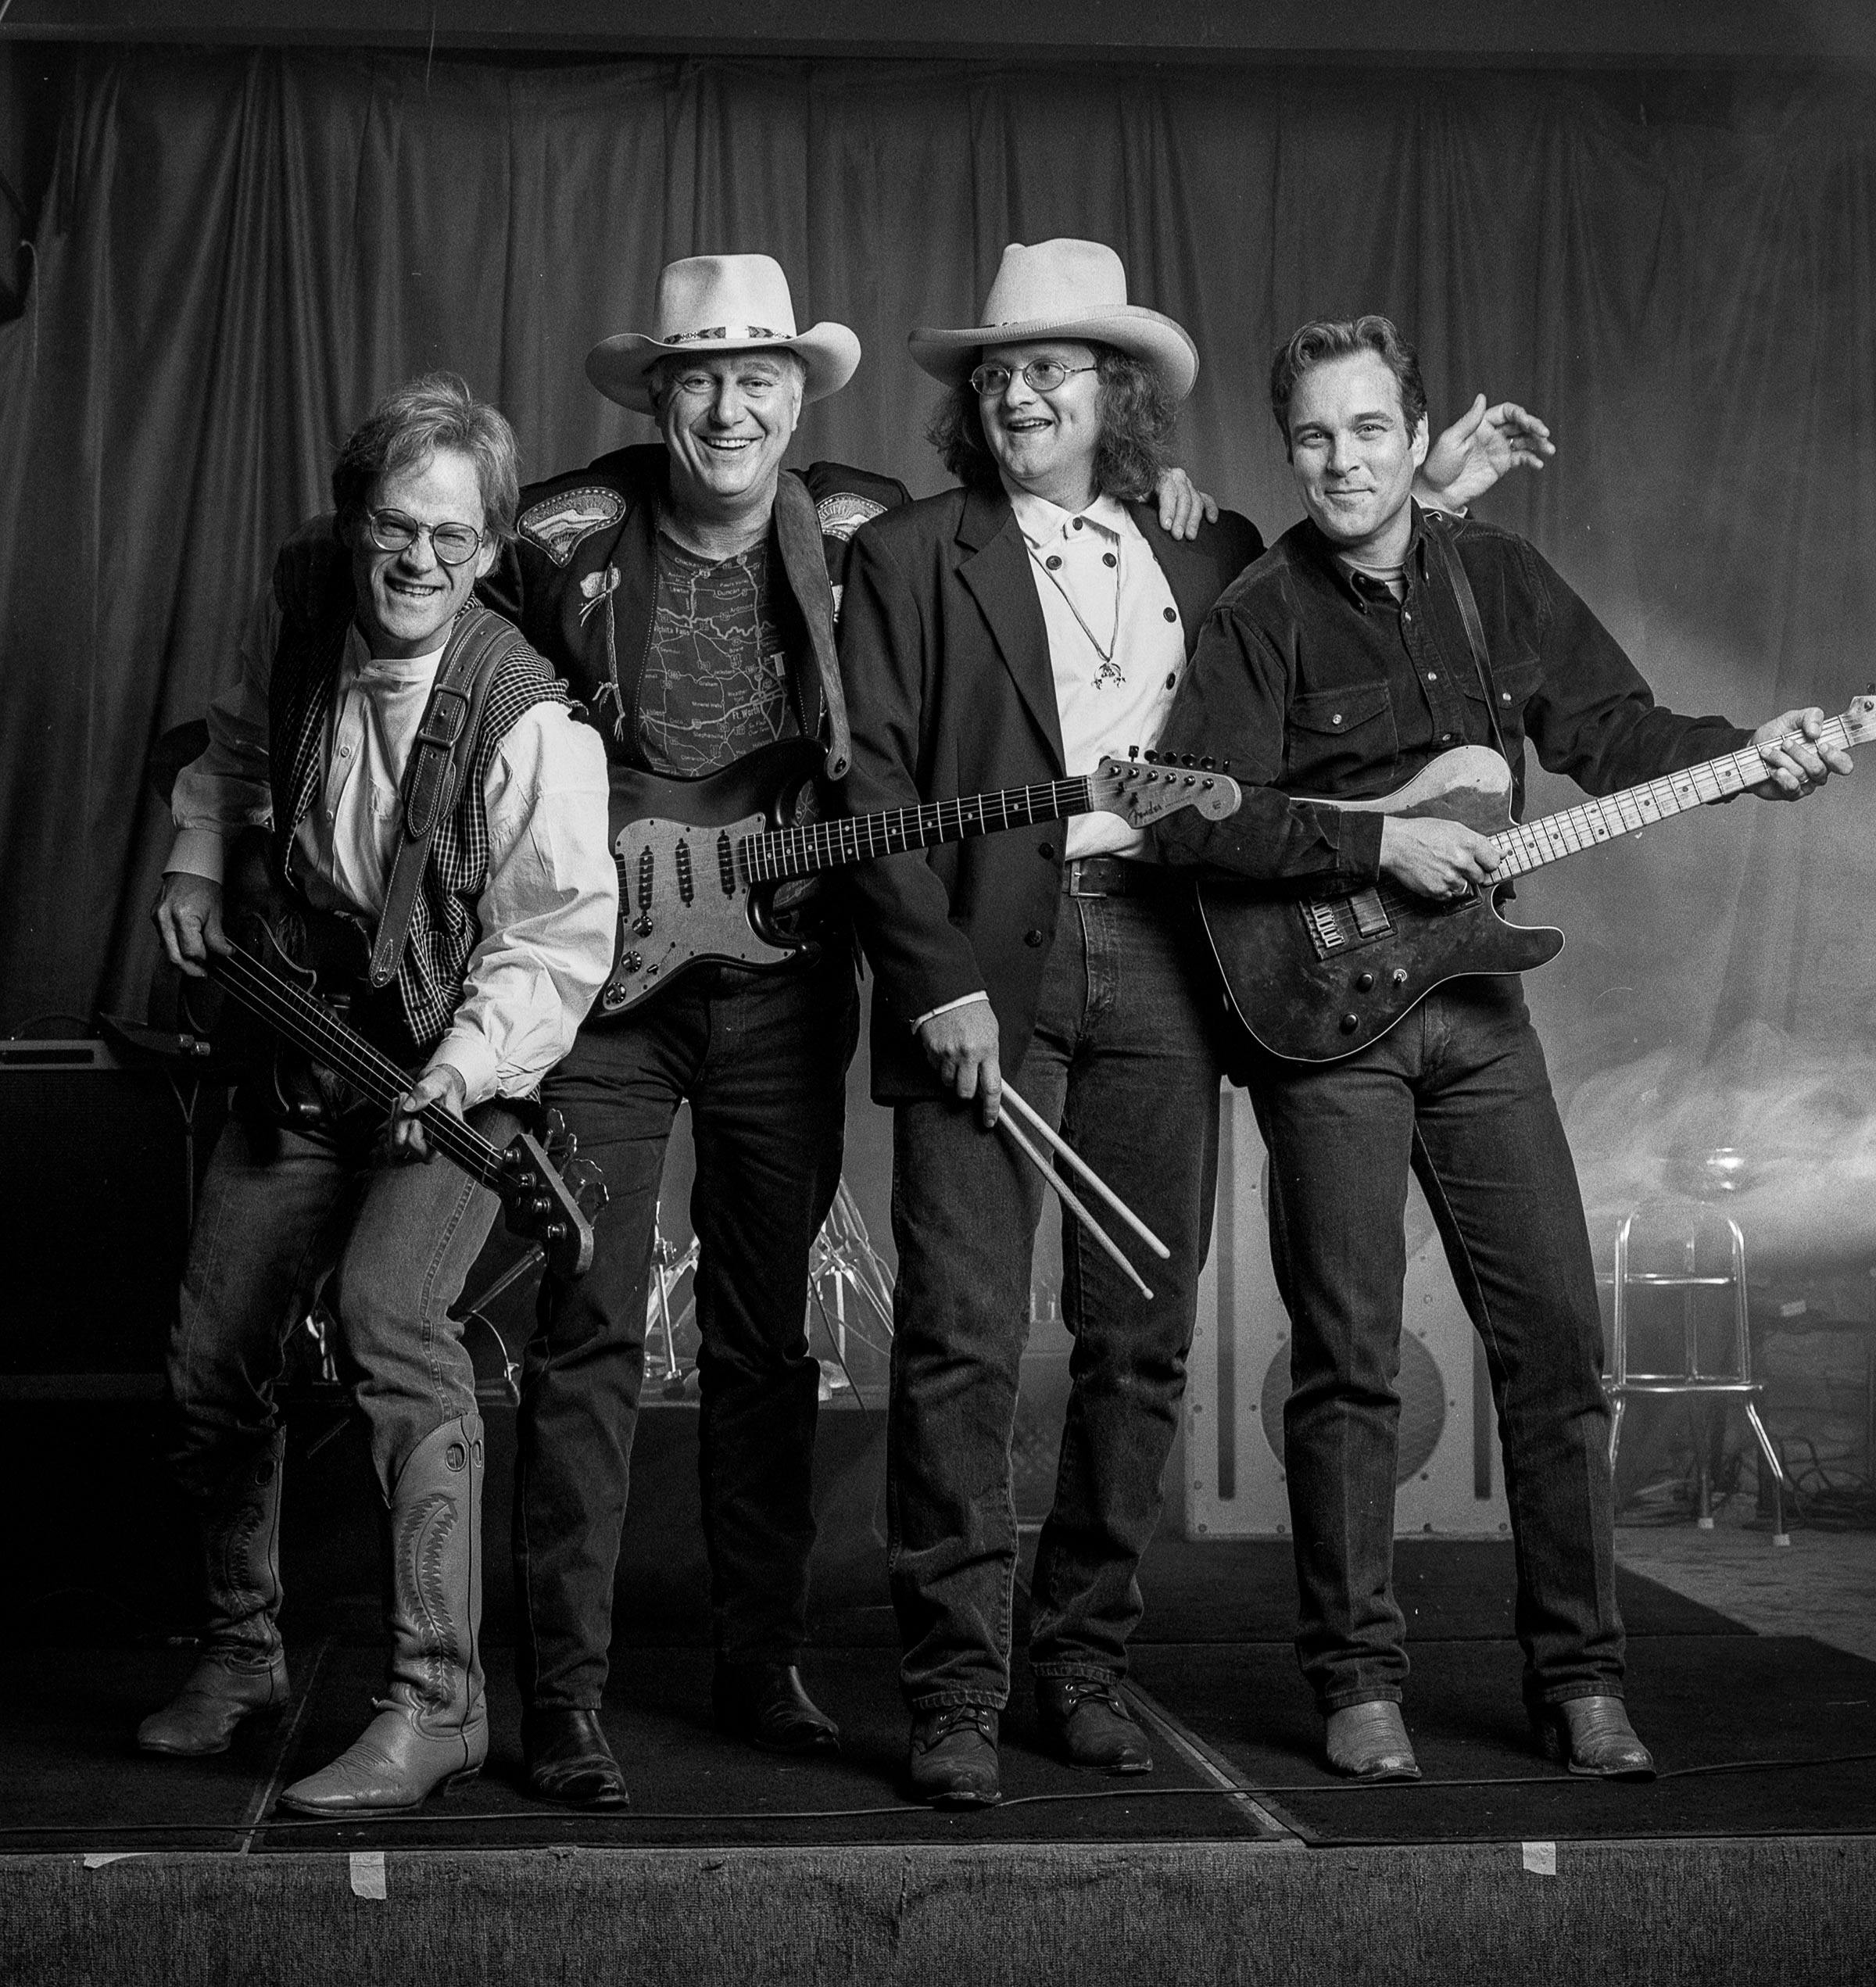 Bob Livingston, Jerry Jeff Walker, Freddie Krc, and John Inmon holding their instruments with their arms around each other.  